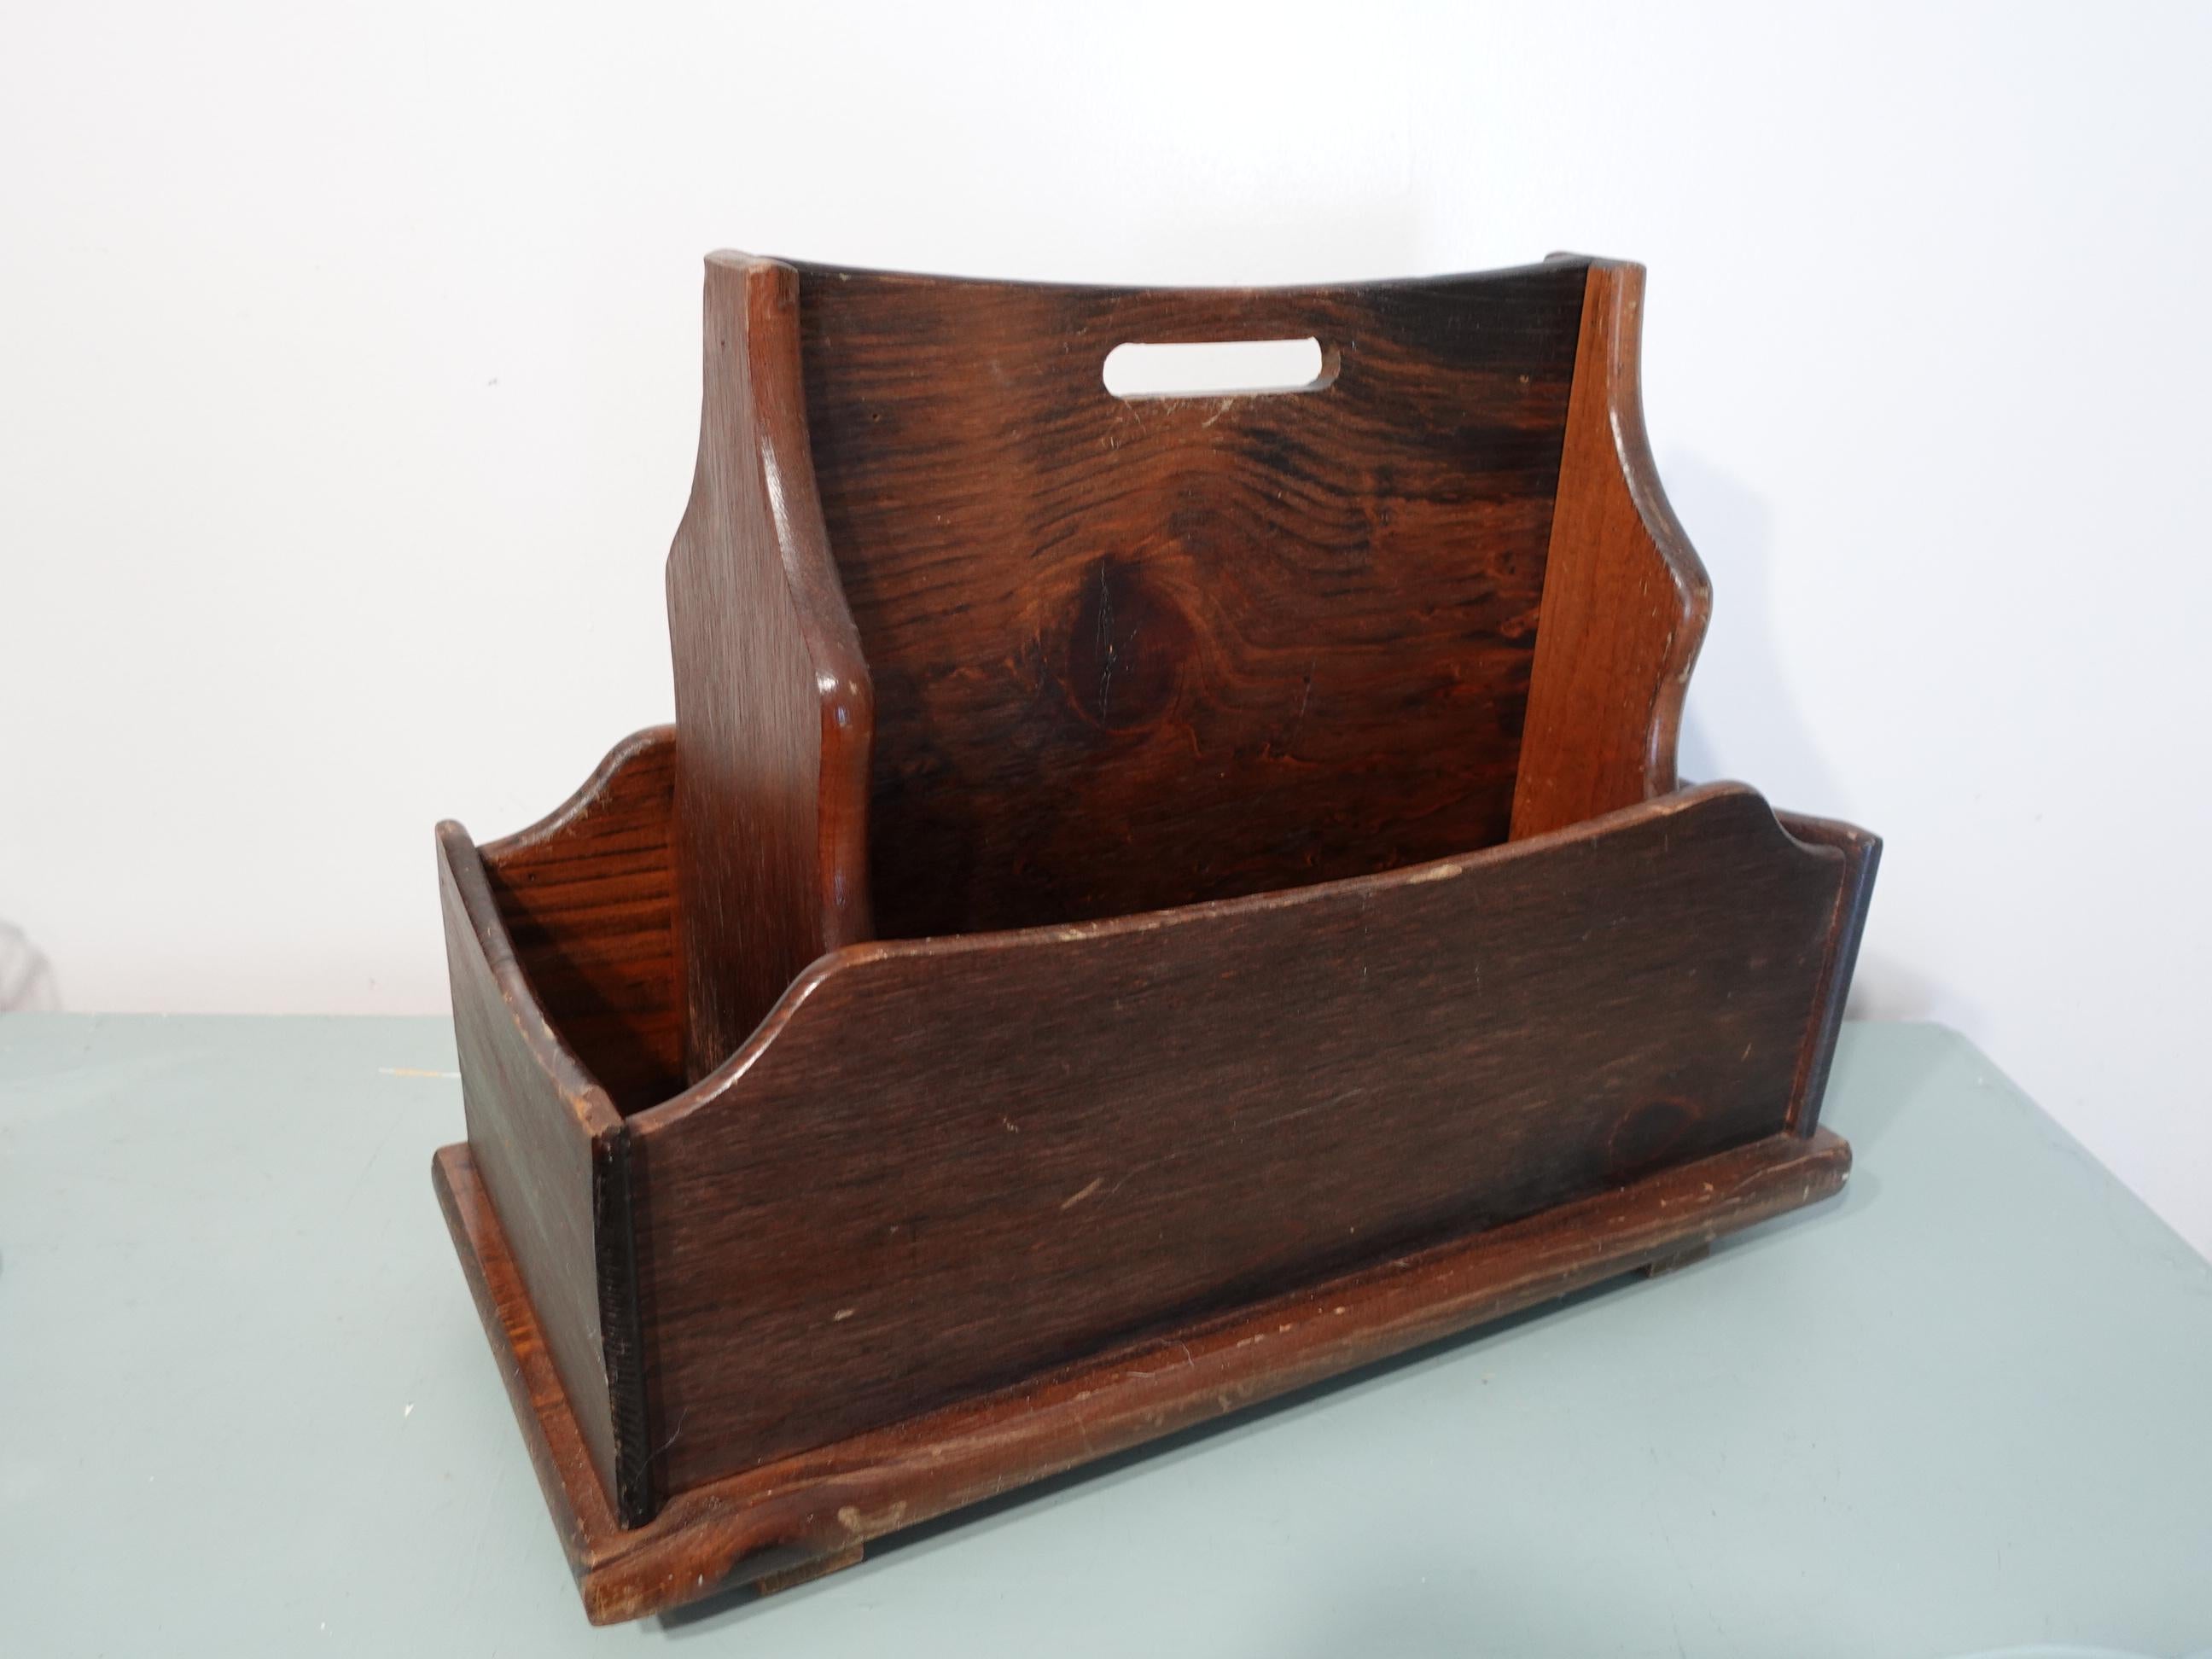 Hand-Crafted Antique Large 18th Century, Georgian Cutlery Caddy